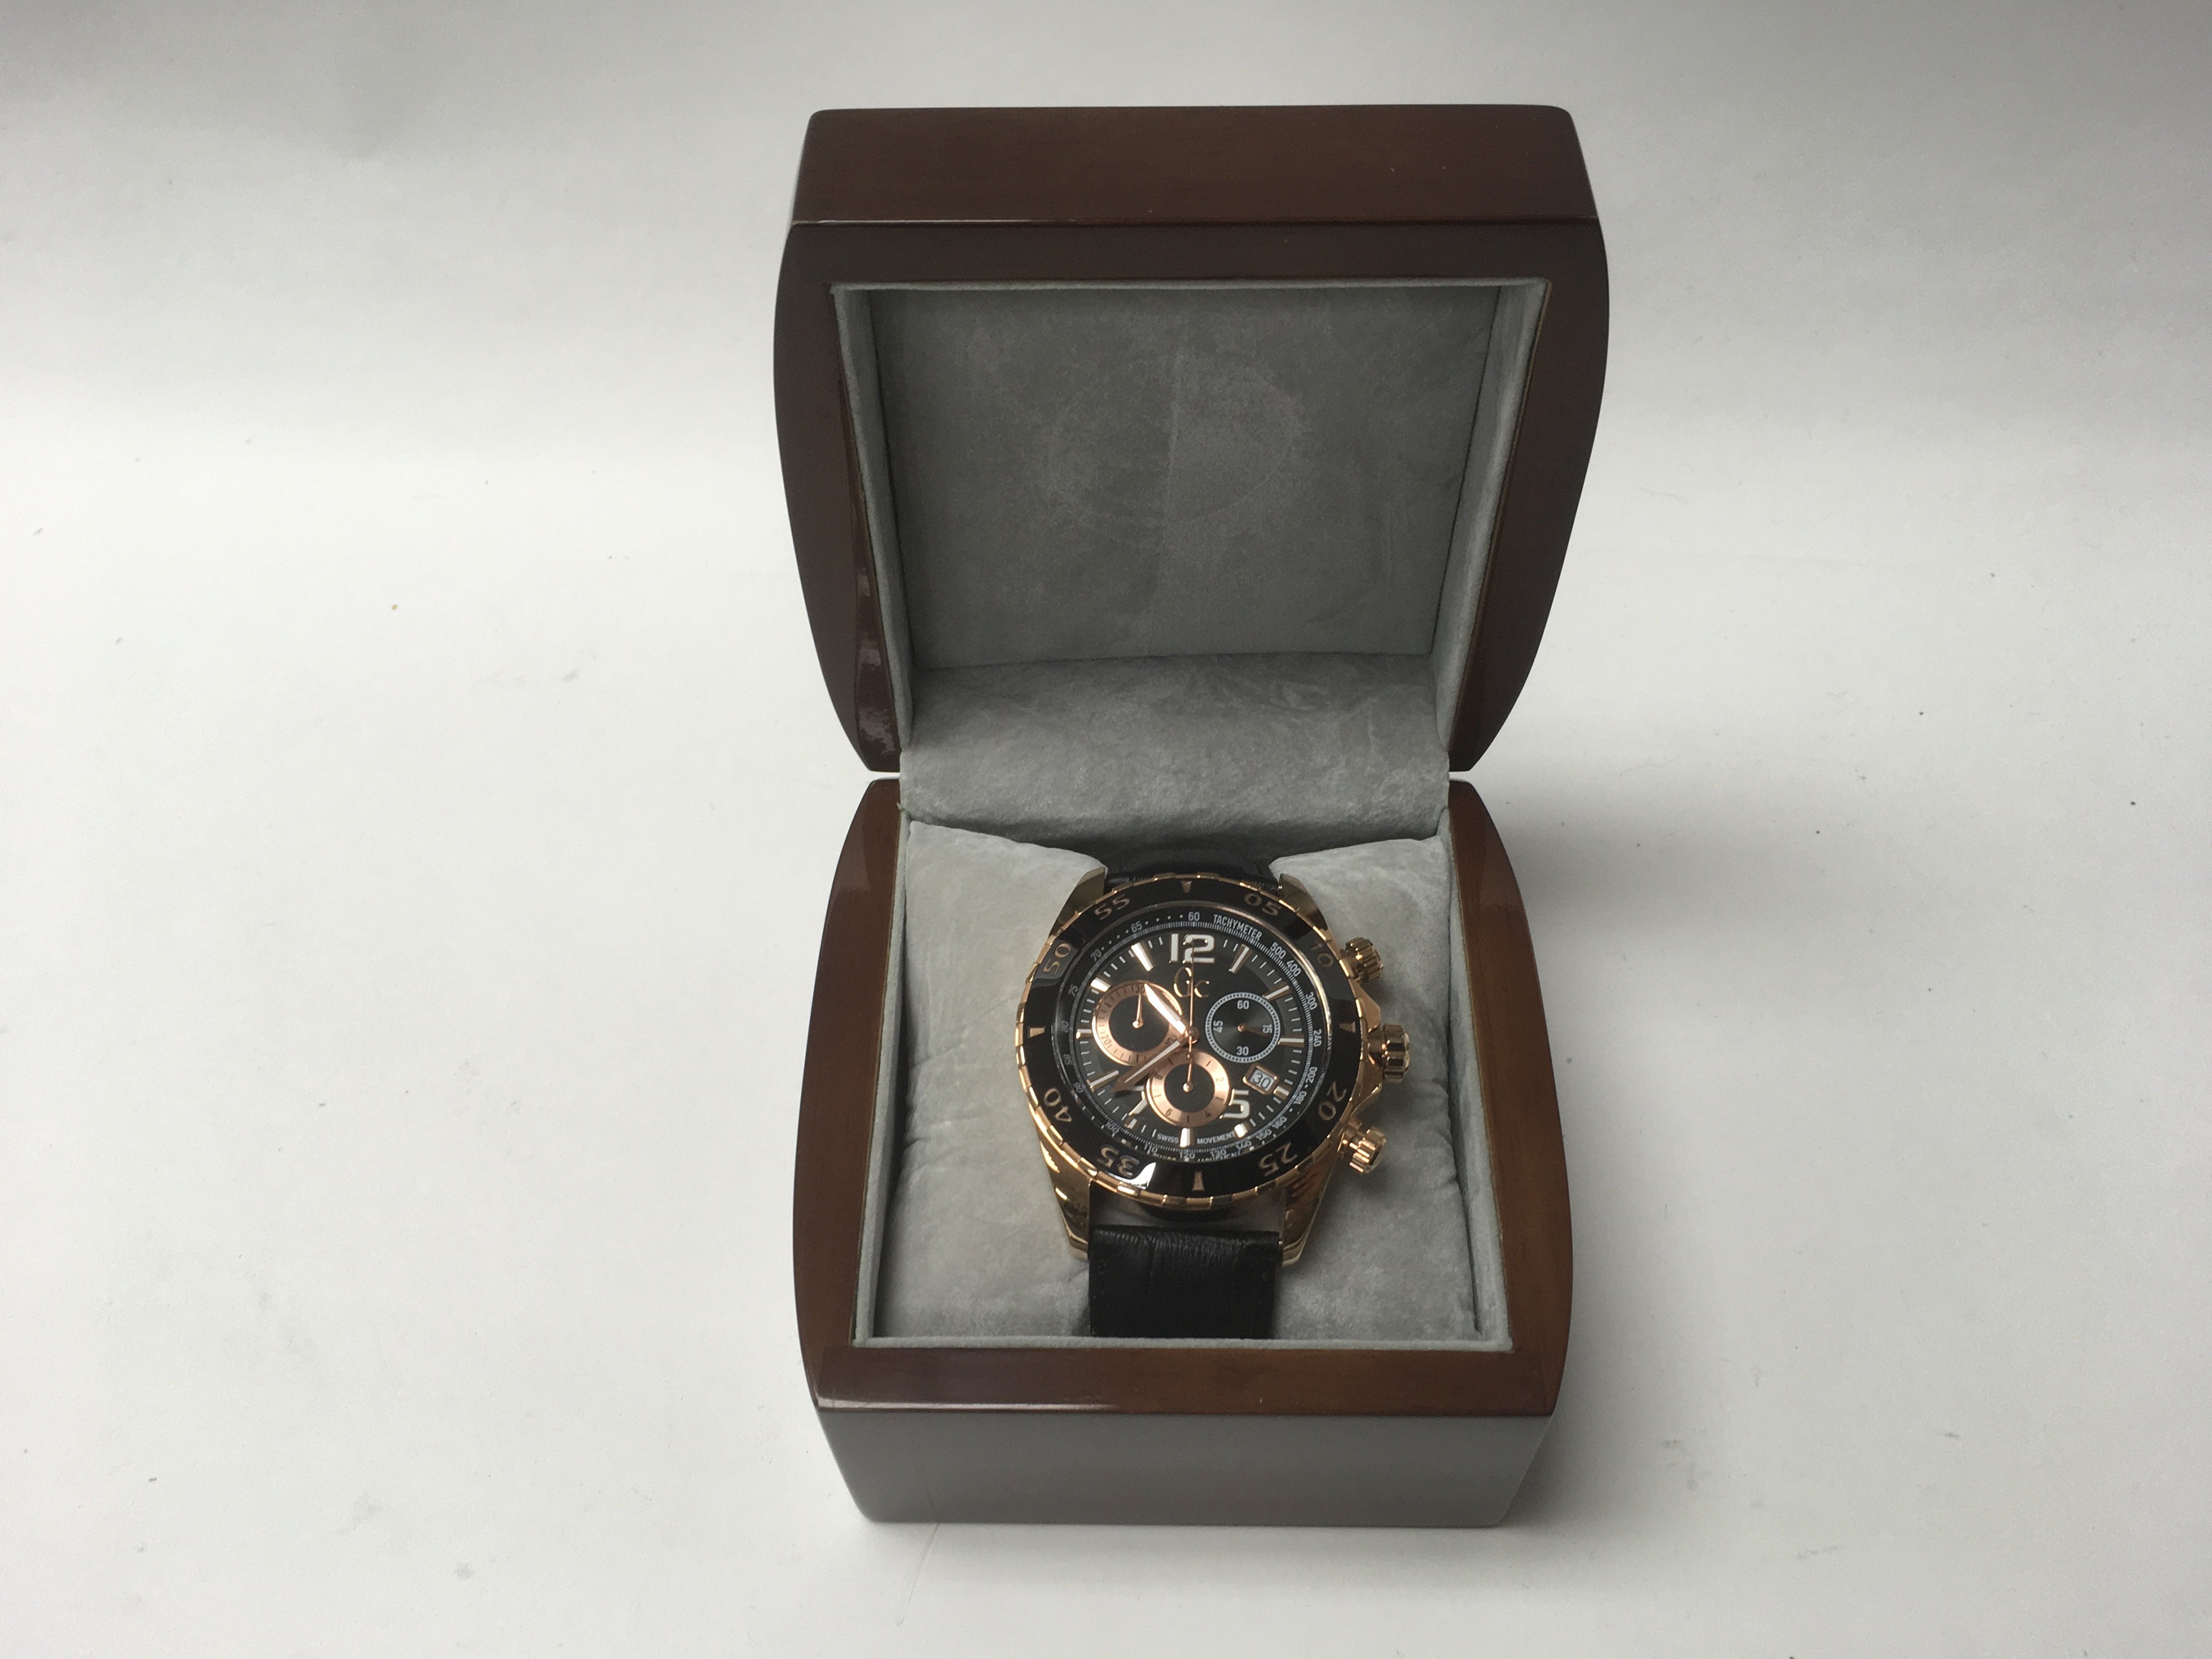 A boxed gent's guess chronograph wrist watch